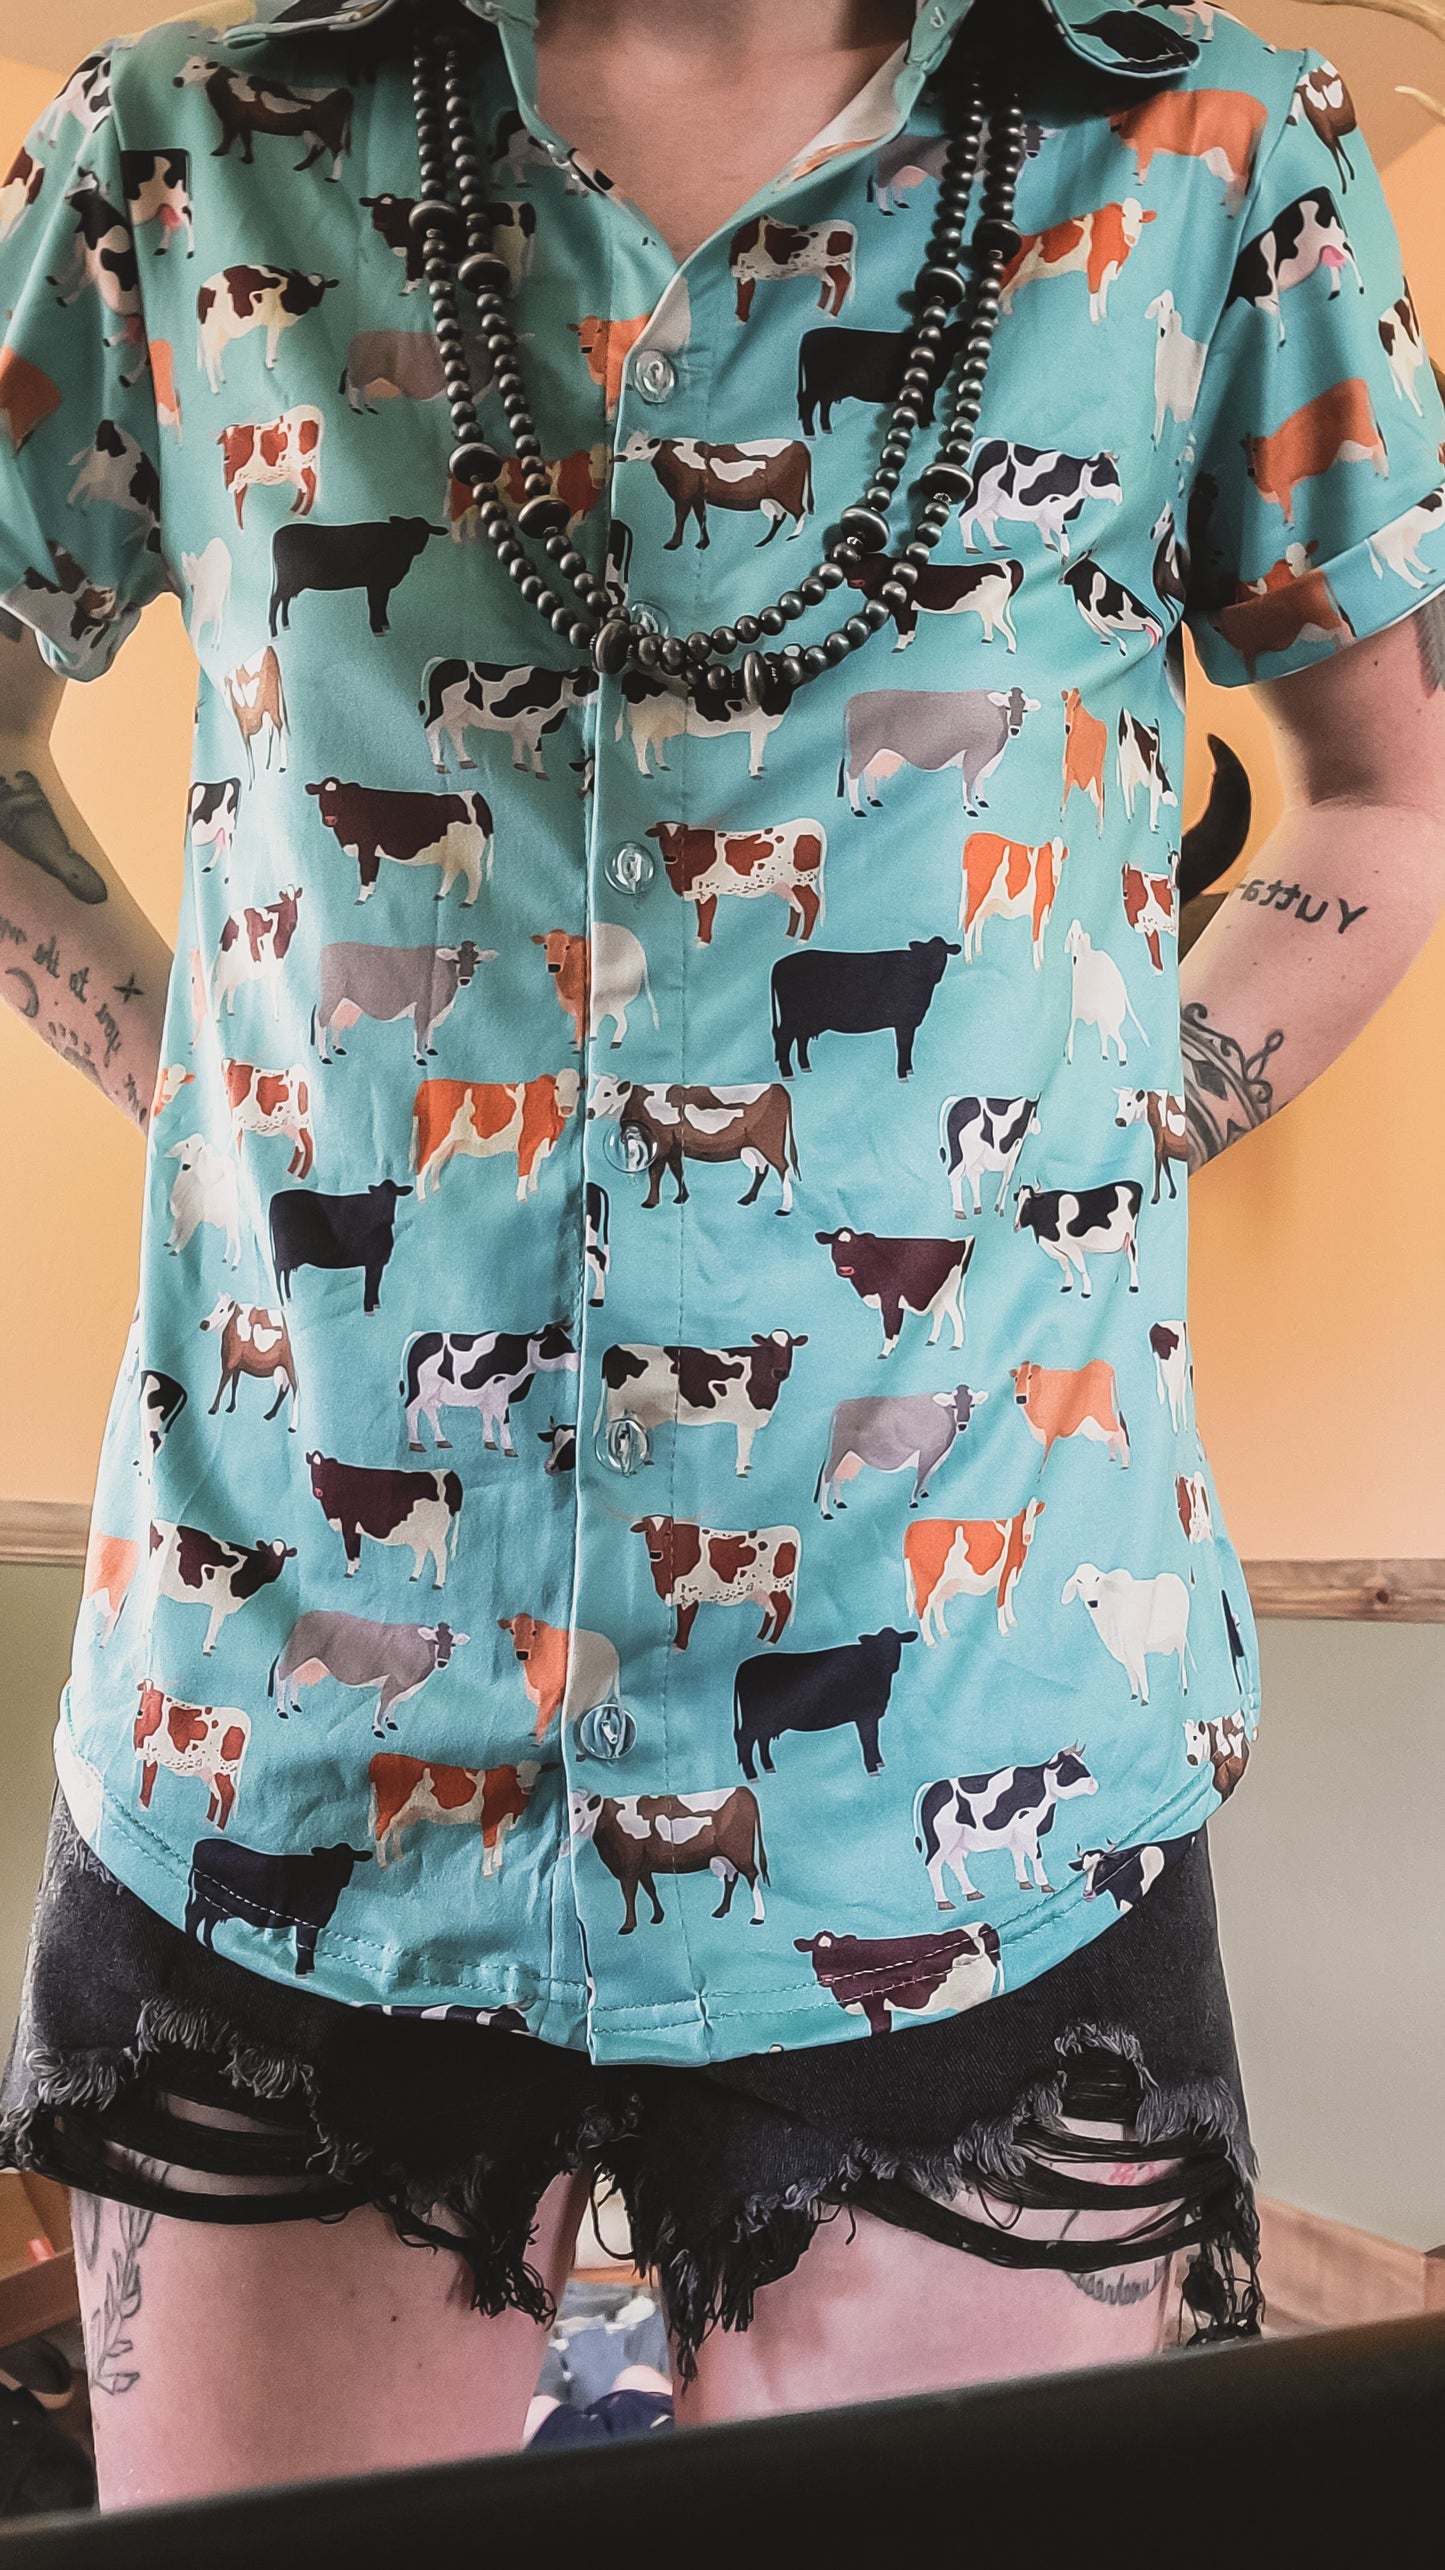 Cows of Many Colors Blouse